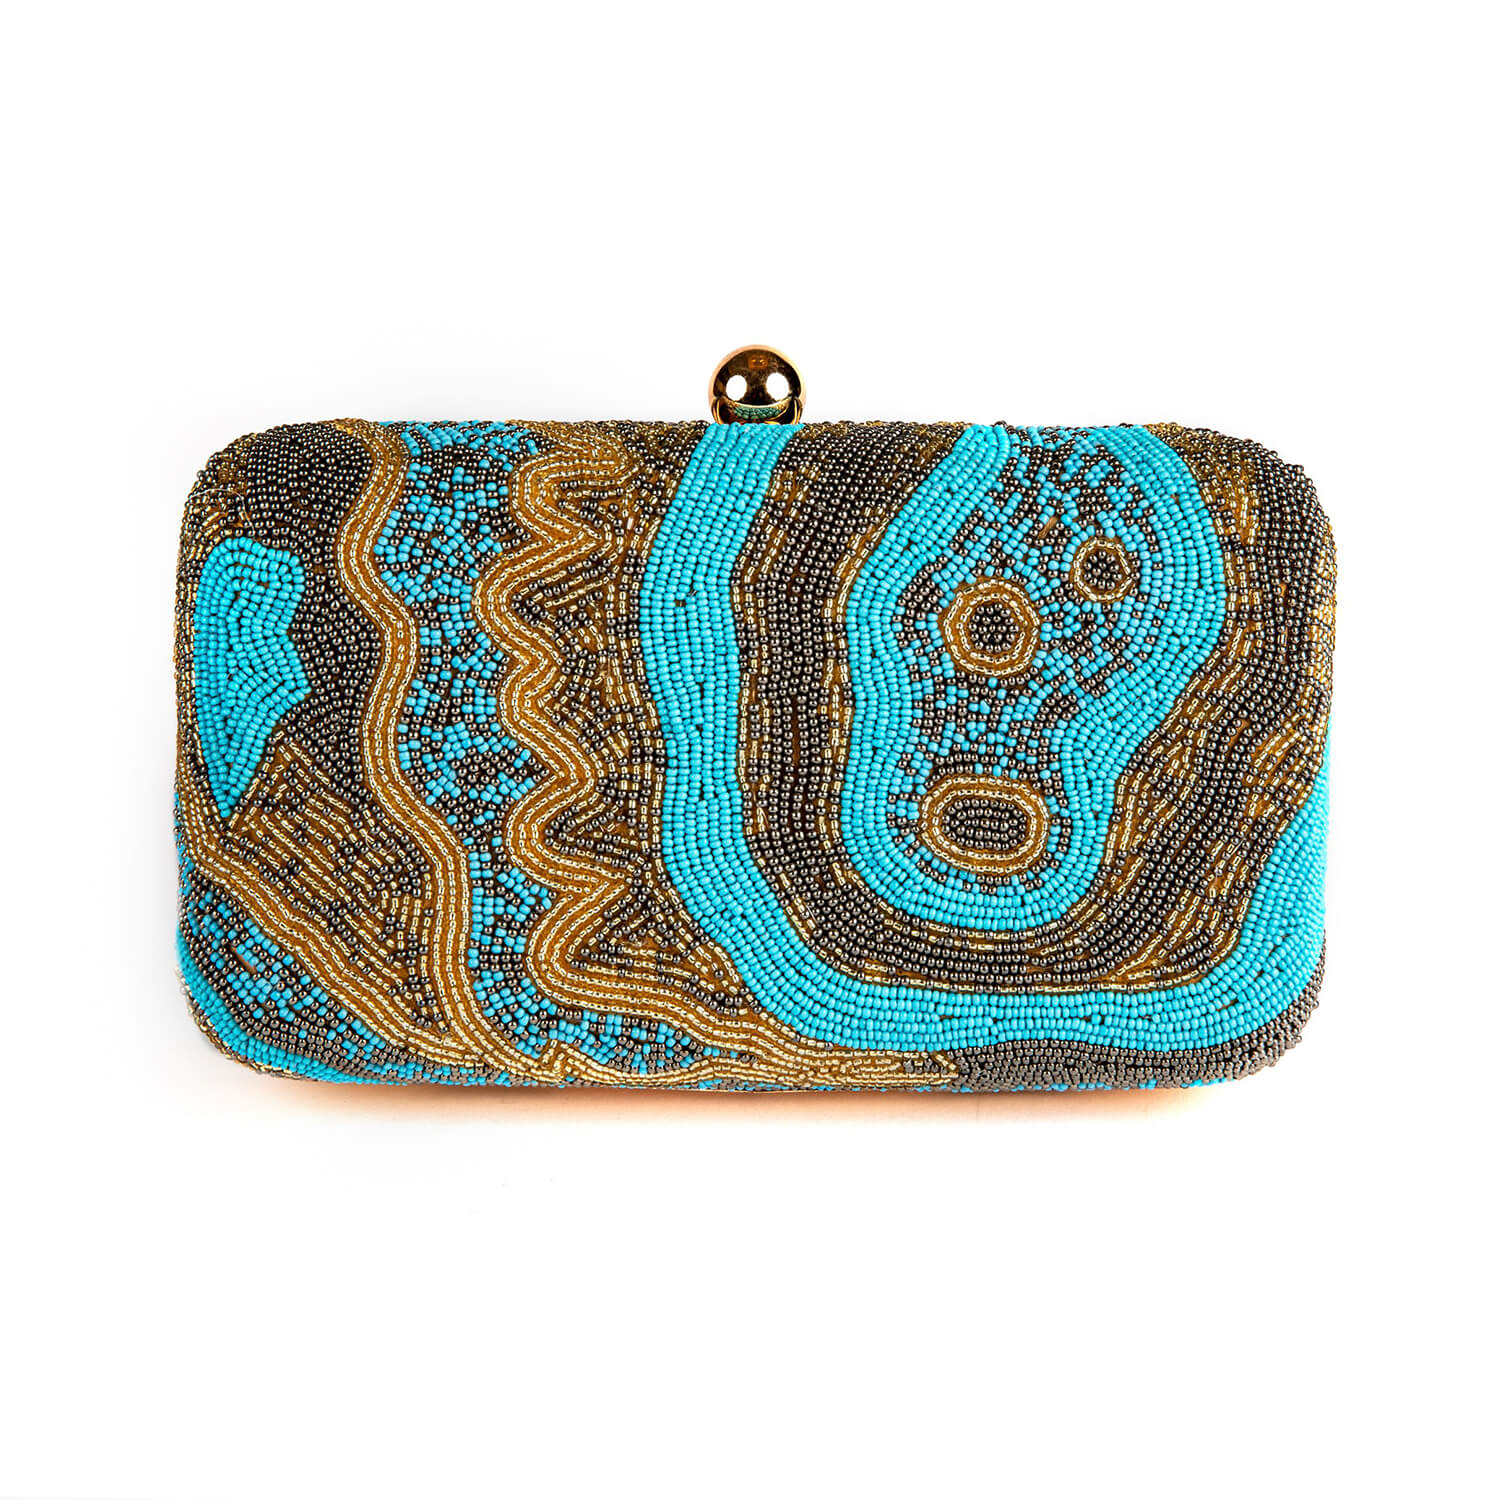 Swirl Bag | Samser Designs - Hand-crafted Hand Bags, Jewelry and ...